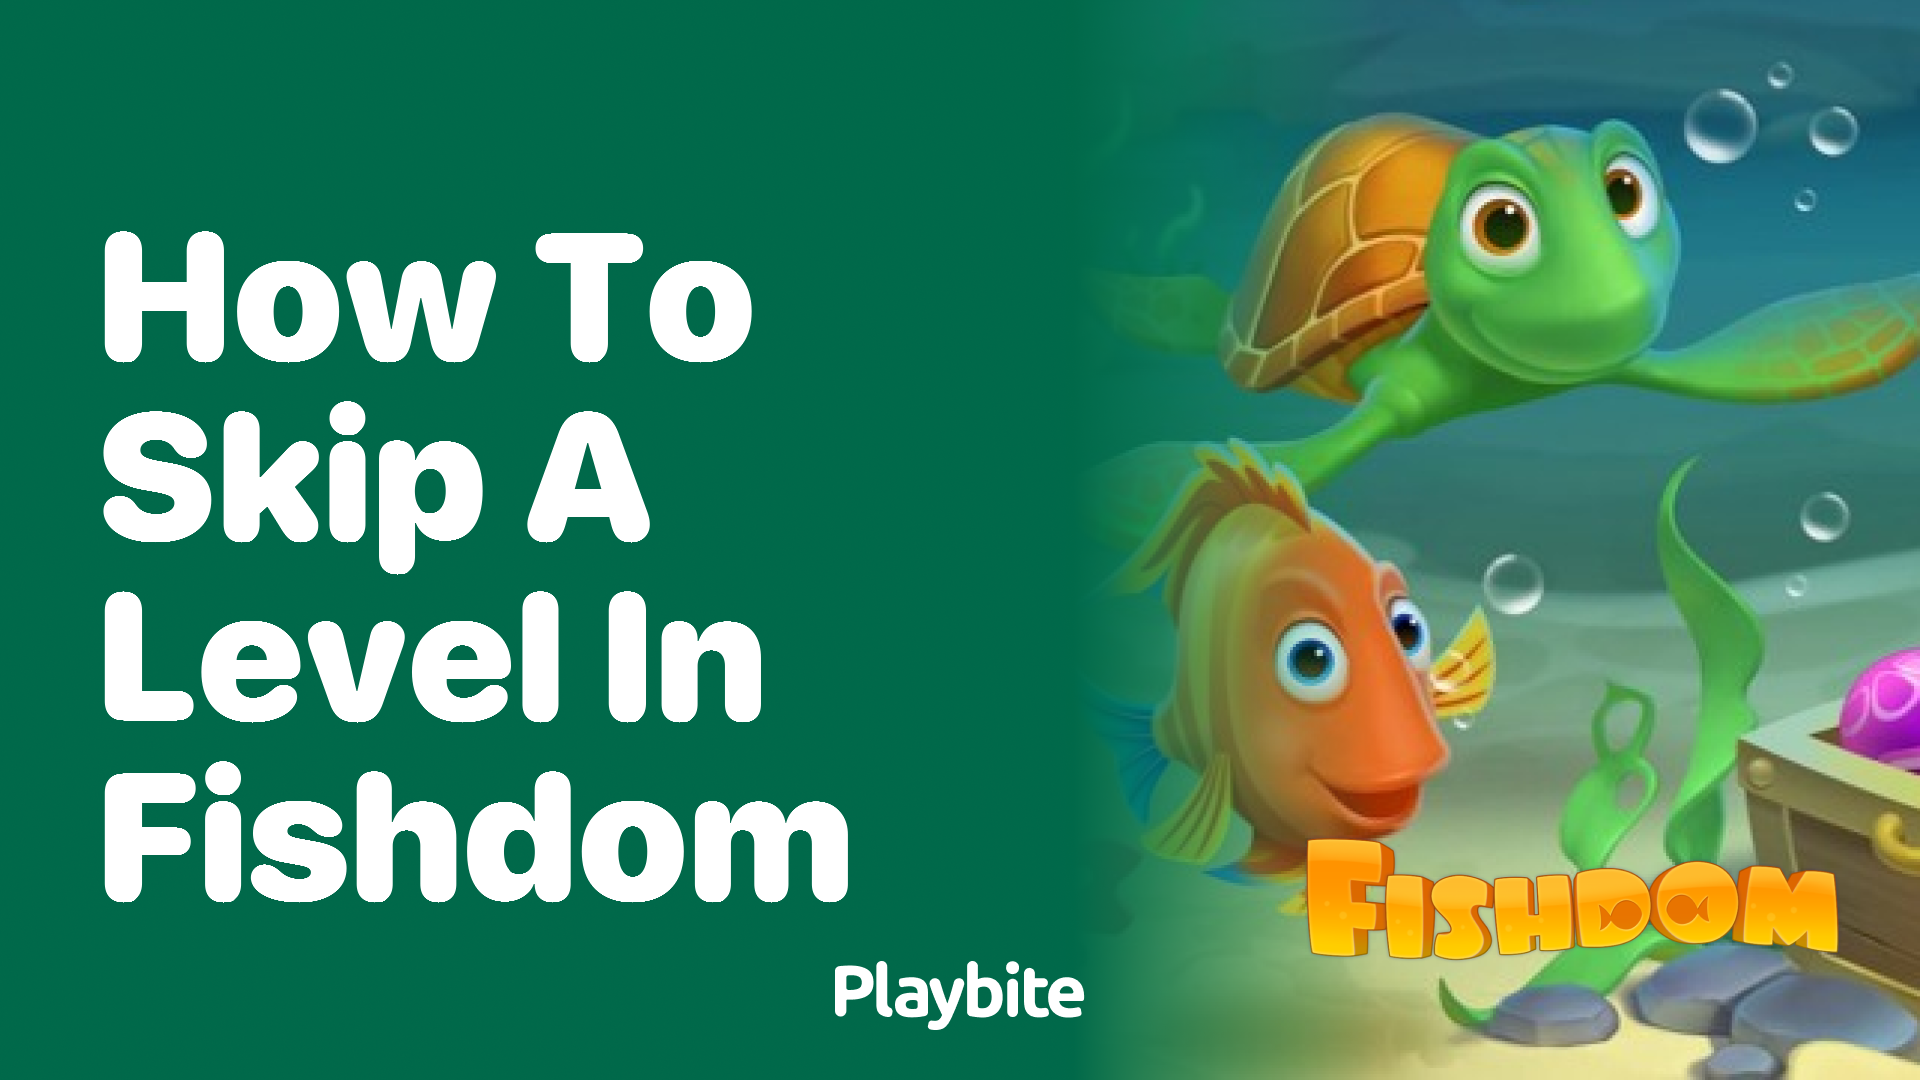 How to Skip a Level in Fishdom: A Handy Guide